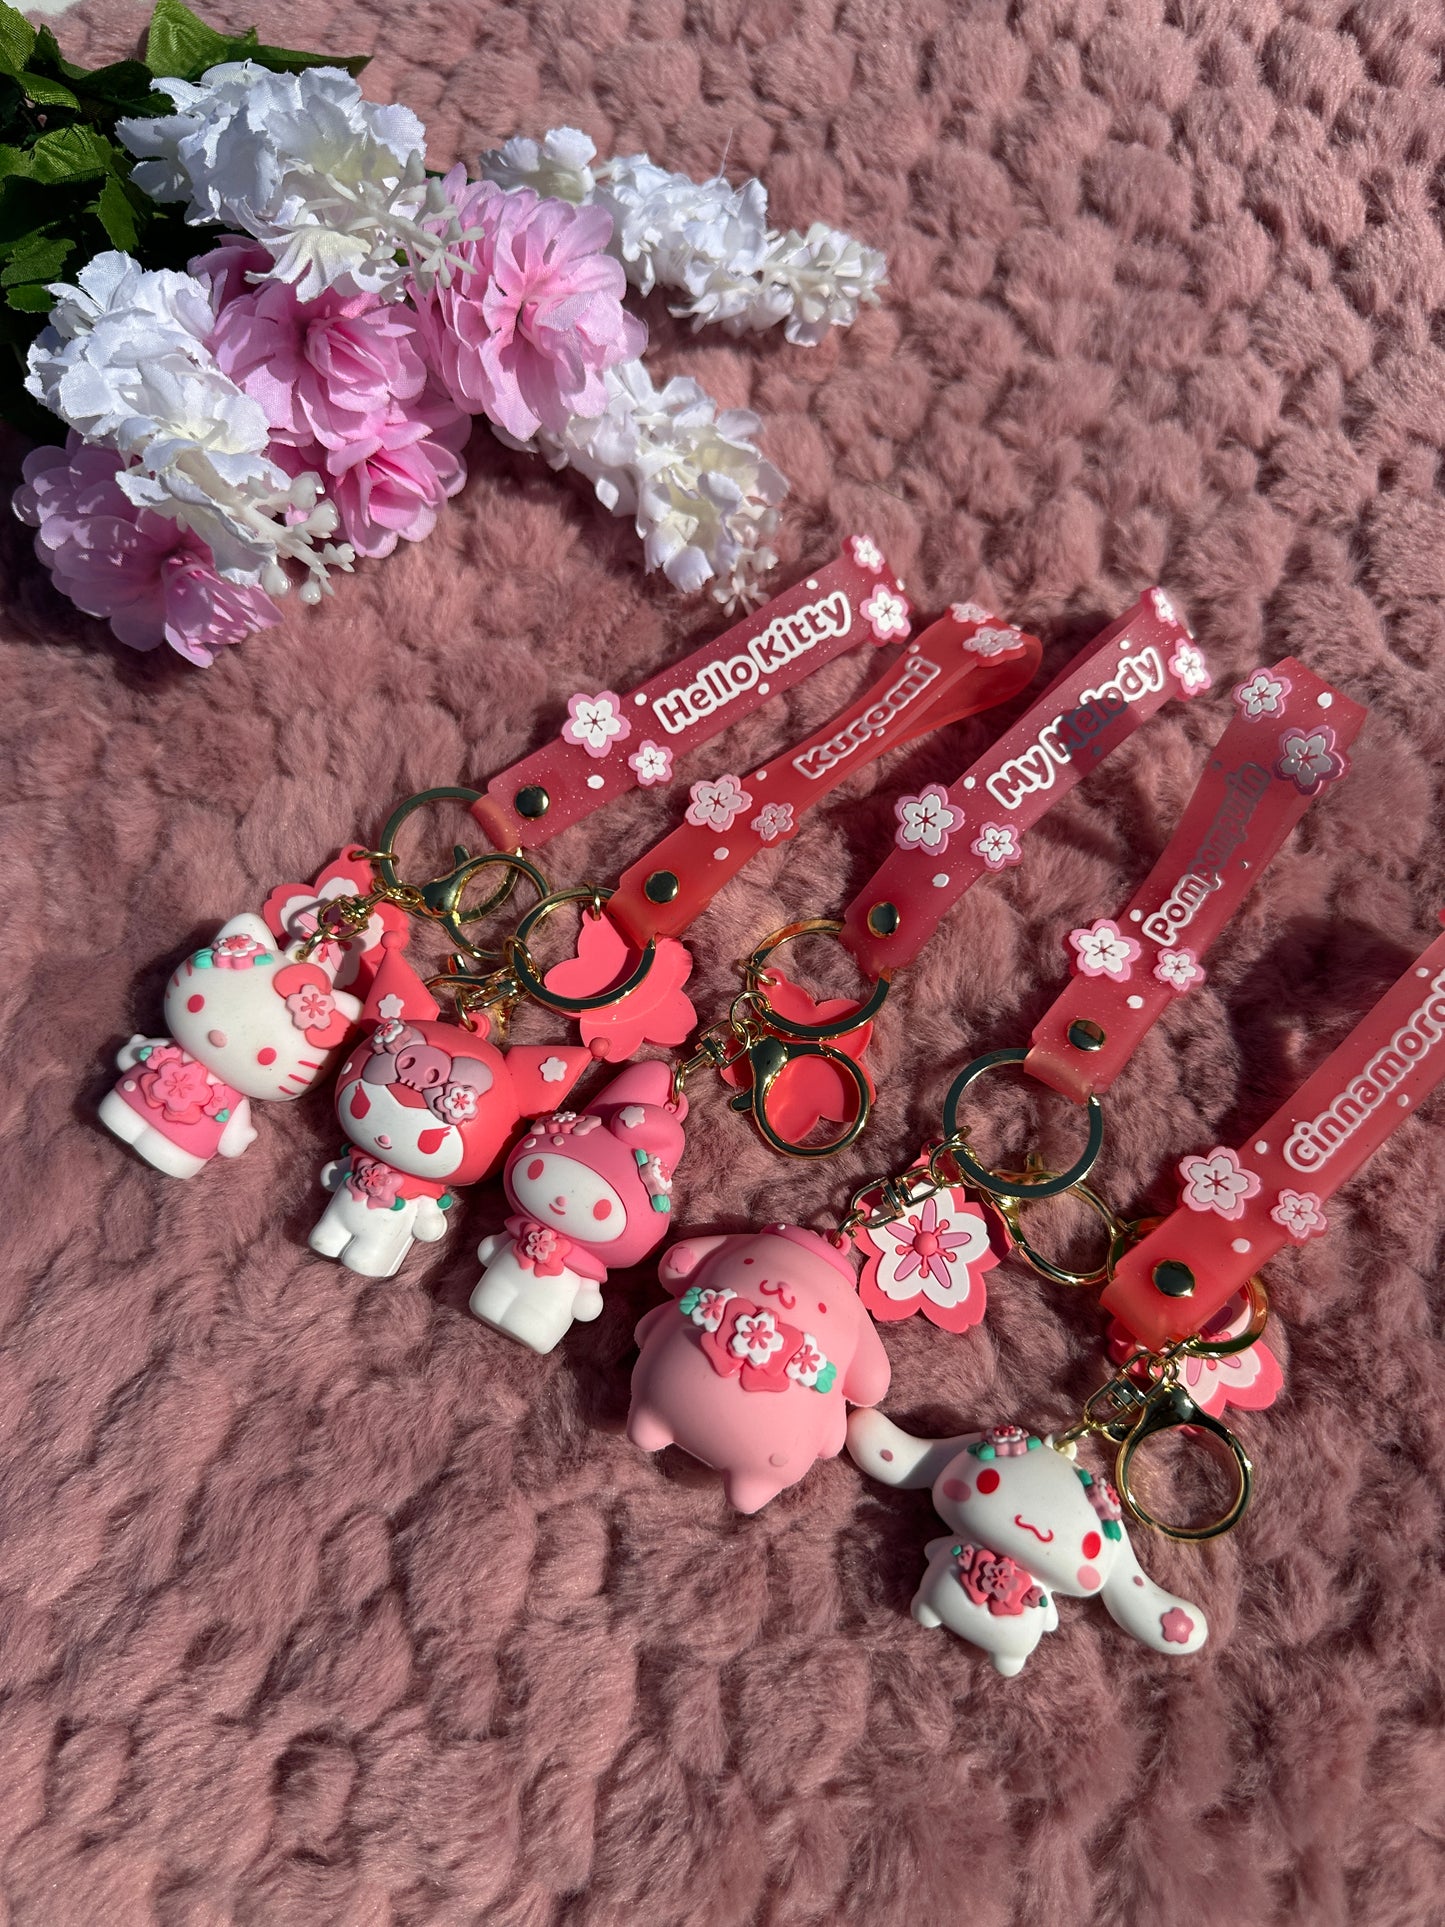 Sakura | Cherry Blossom | Pink | Pastel | kawaii | Cute | keychains | Gifts for girls | Pompompurin | Melody | Soft pink |